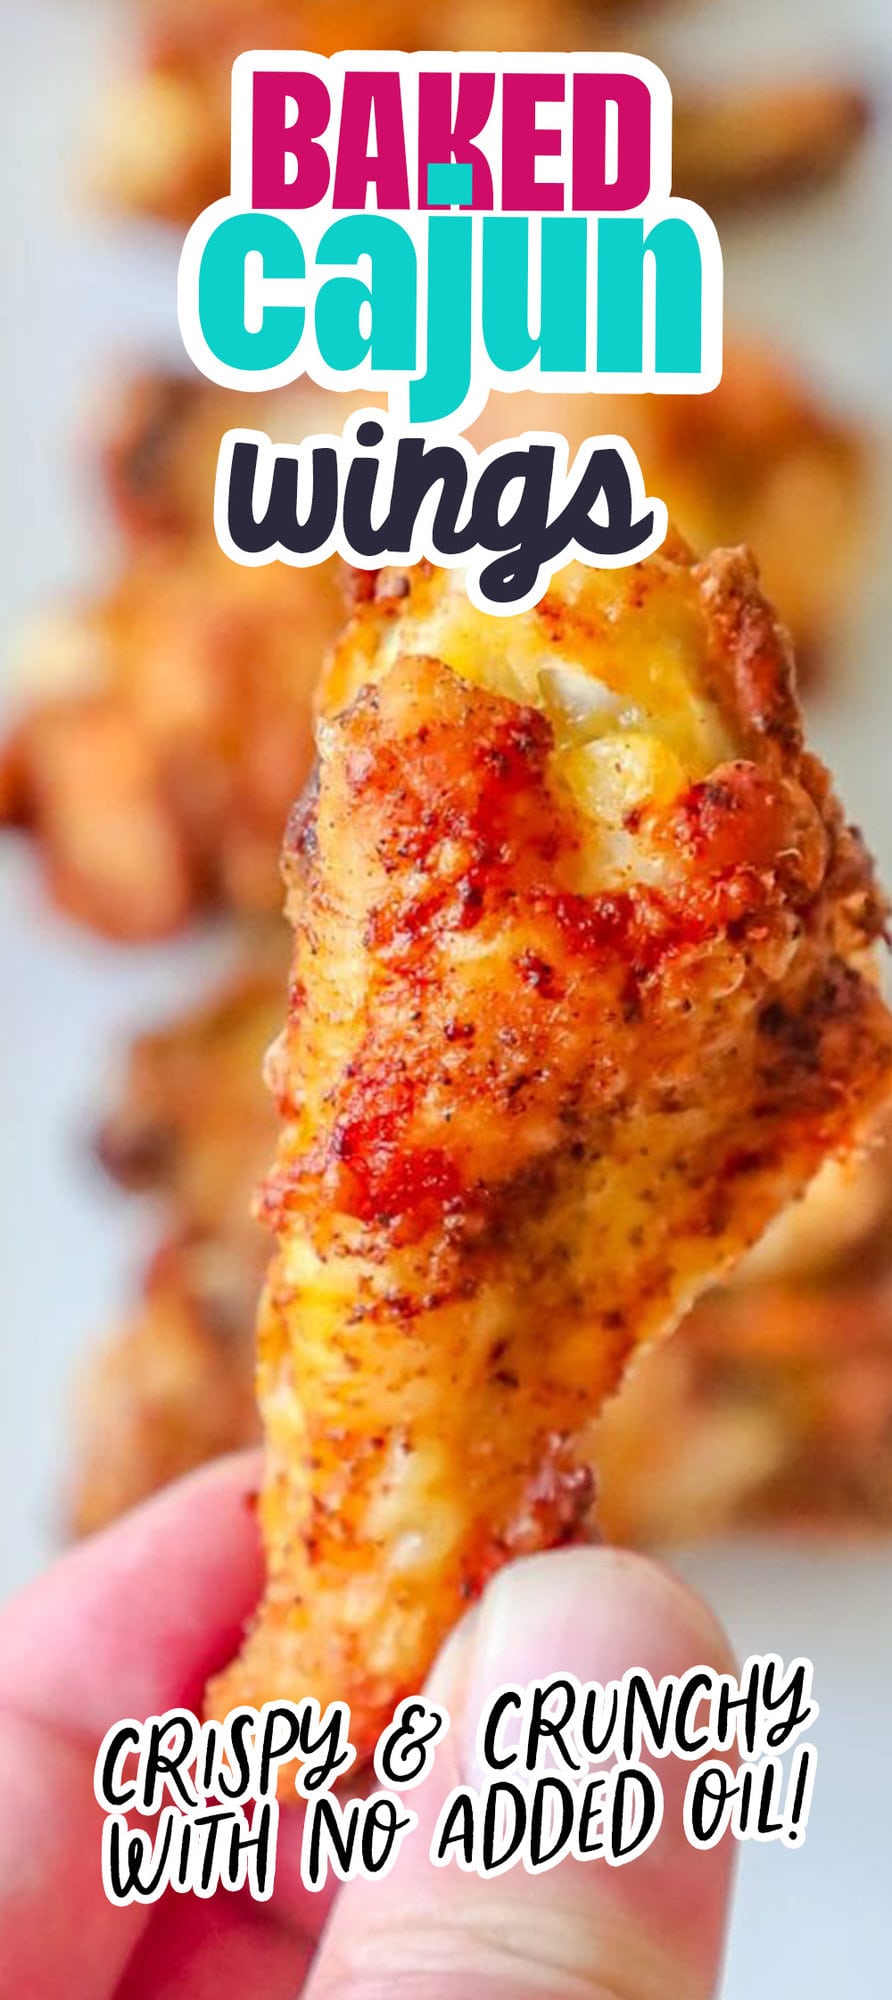 crispy baked chicken wing being held by a hand